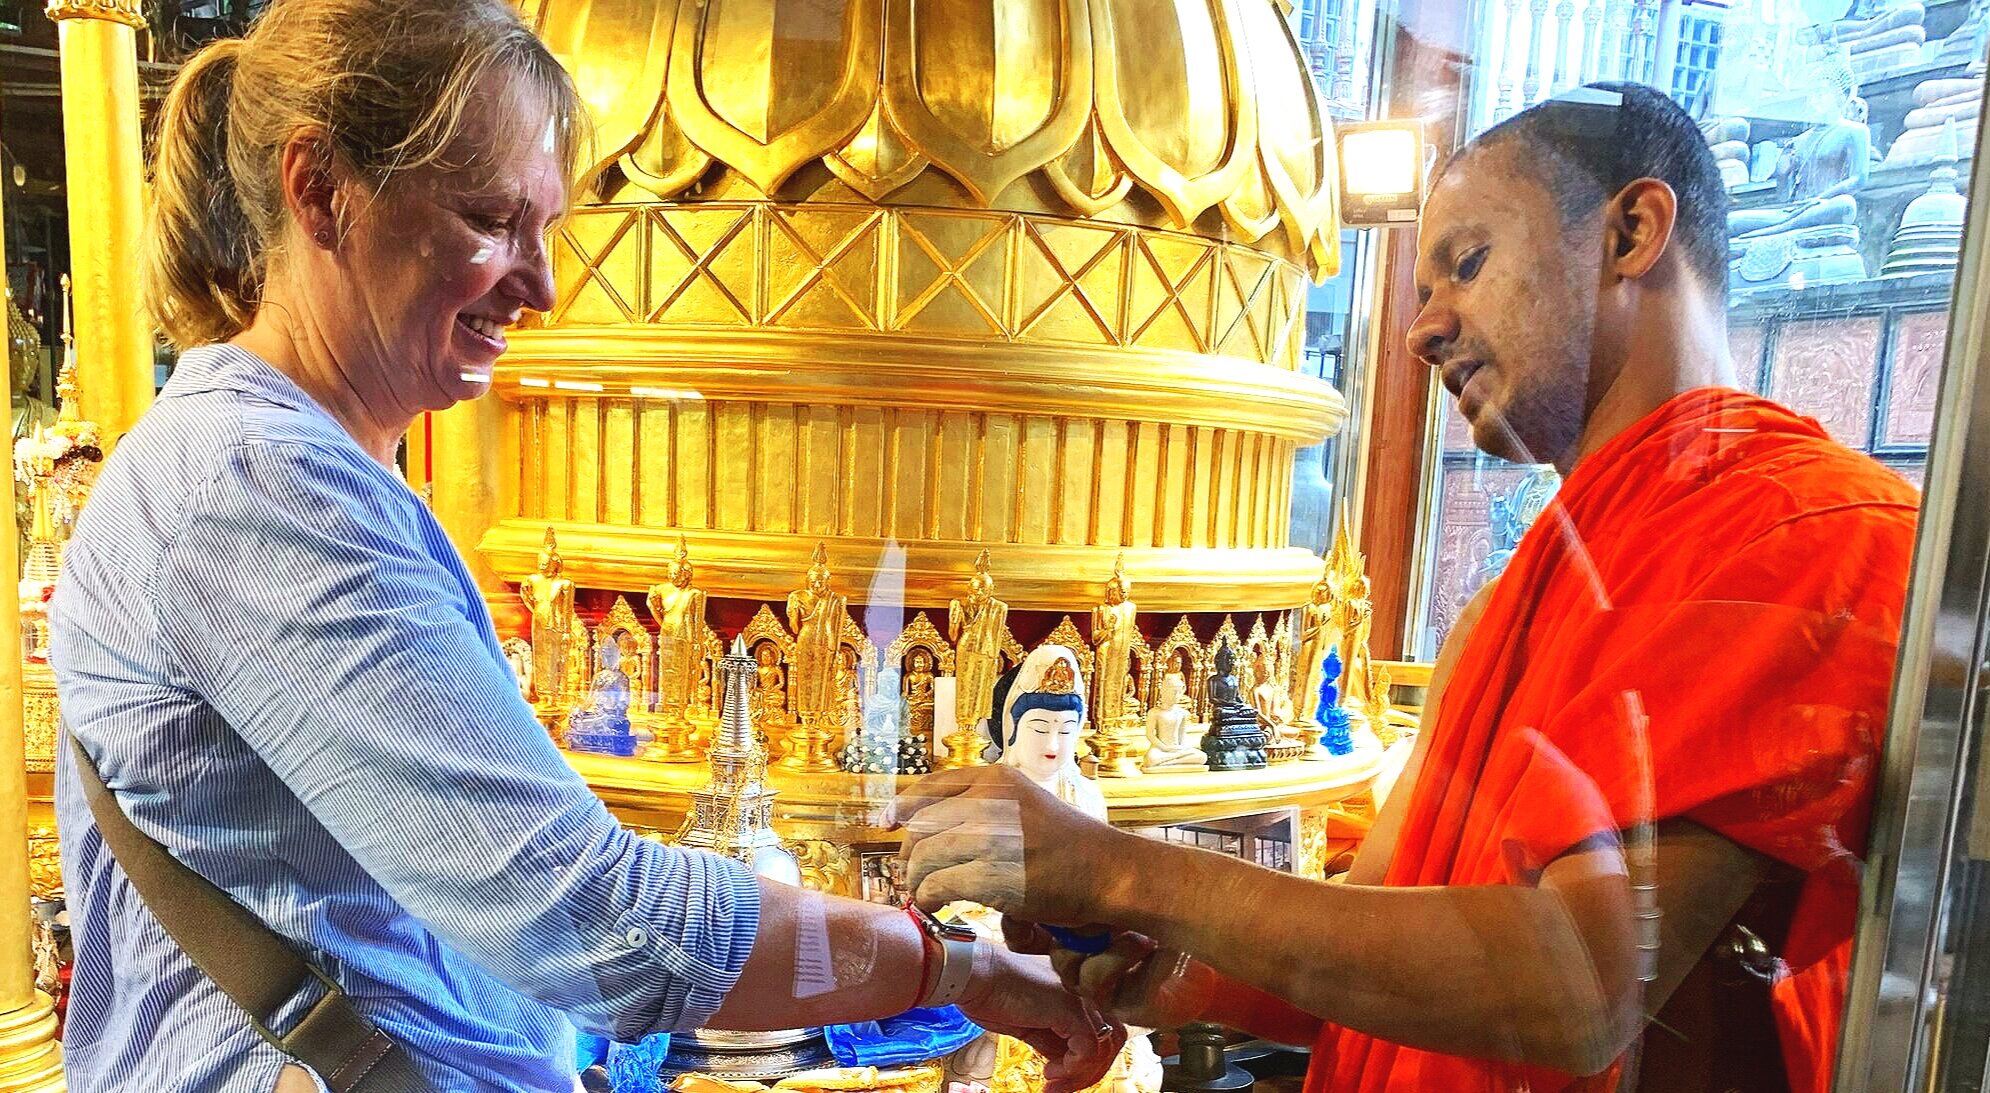 A blessing from a Hindu monk